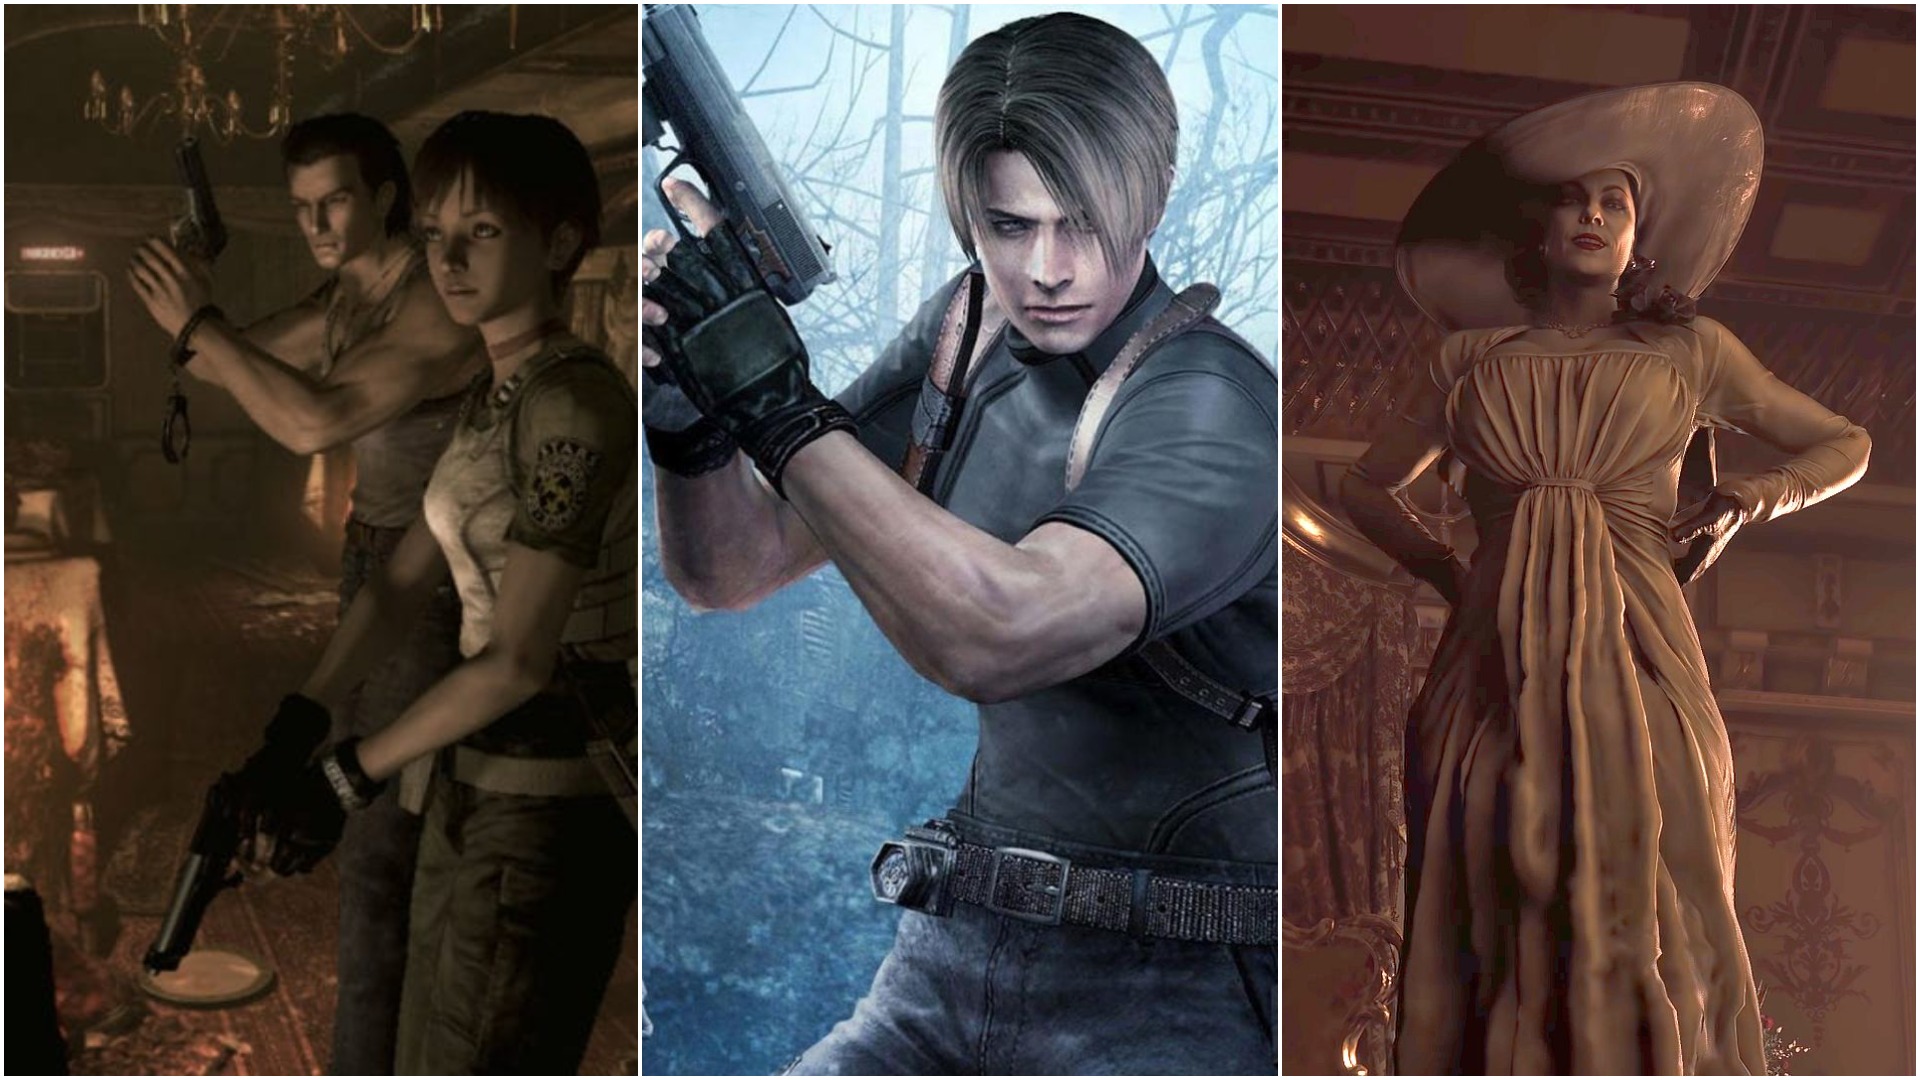 Resident Evil 5 and RE6 Will Be Very Different Remakes, If They Happen